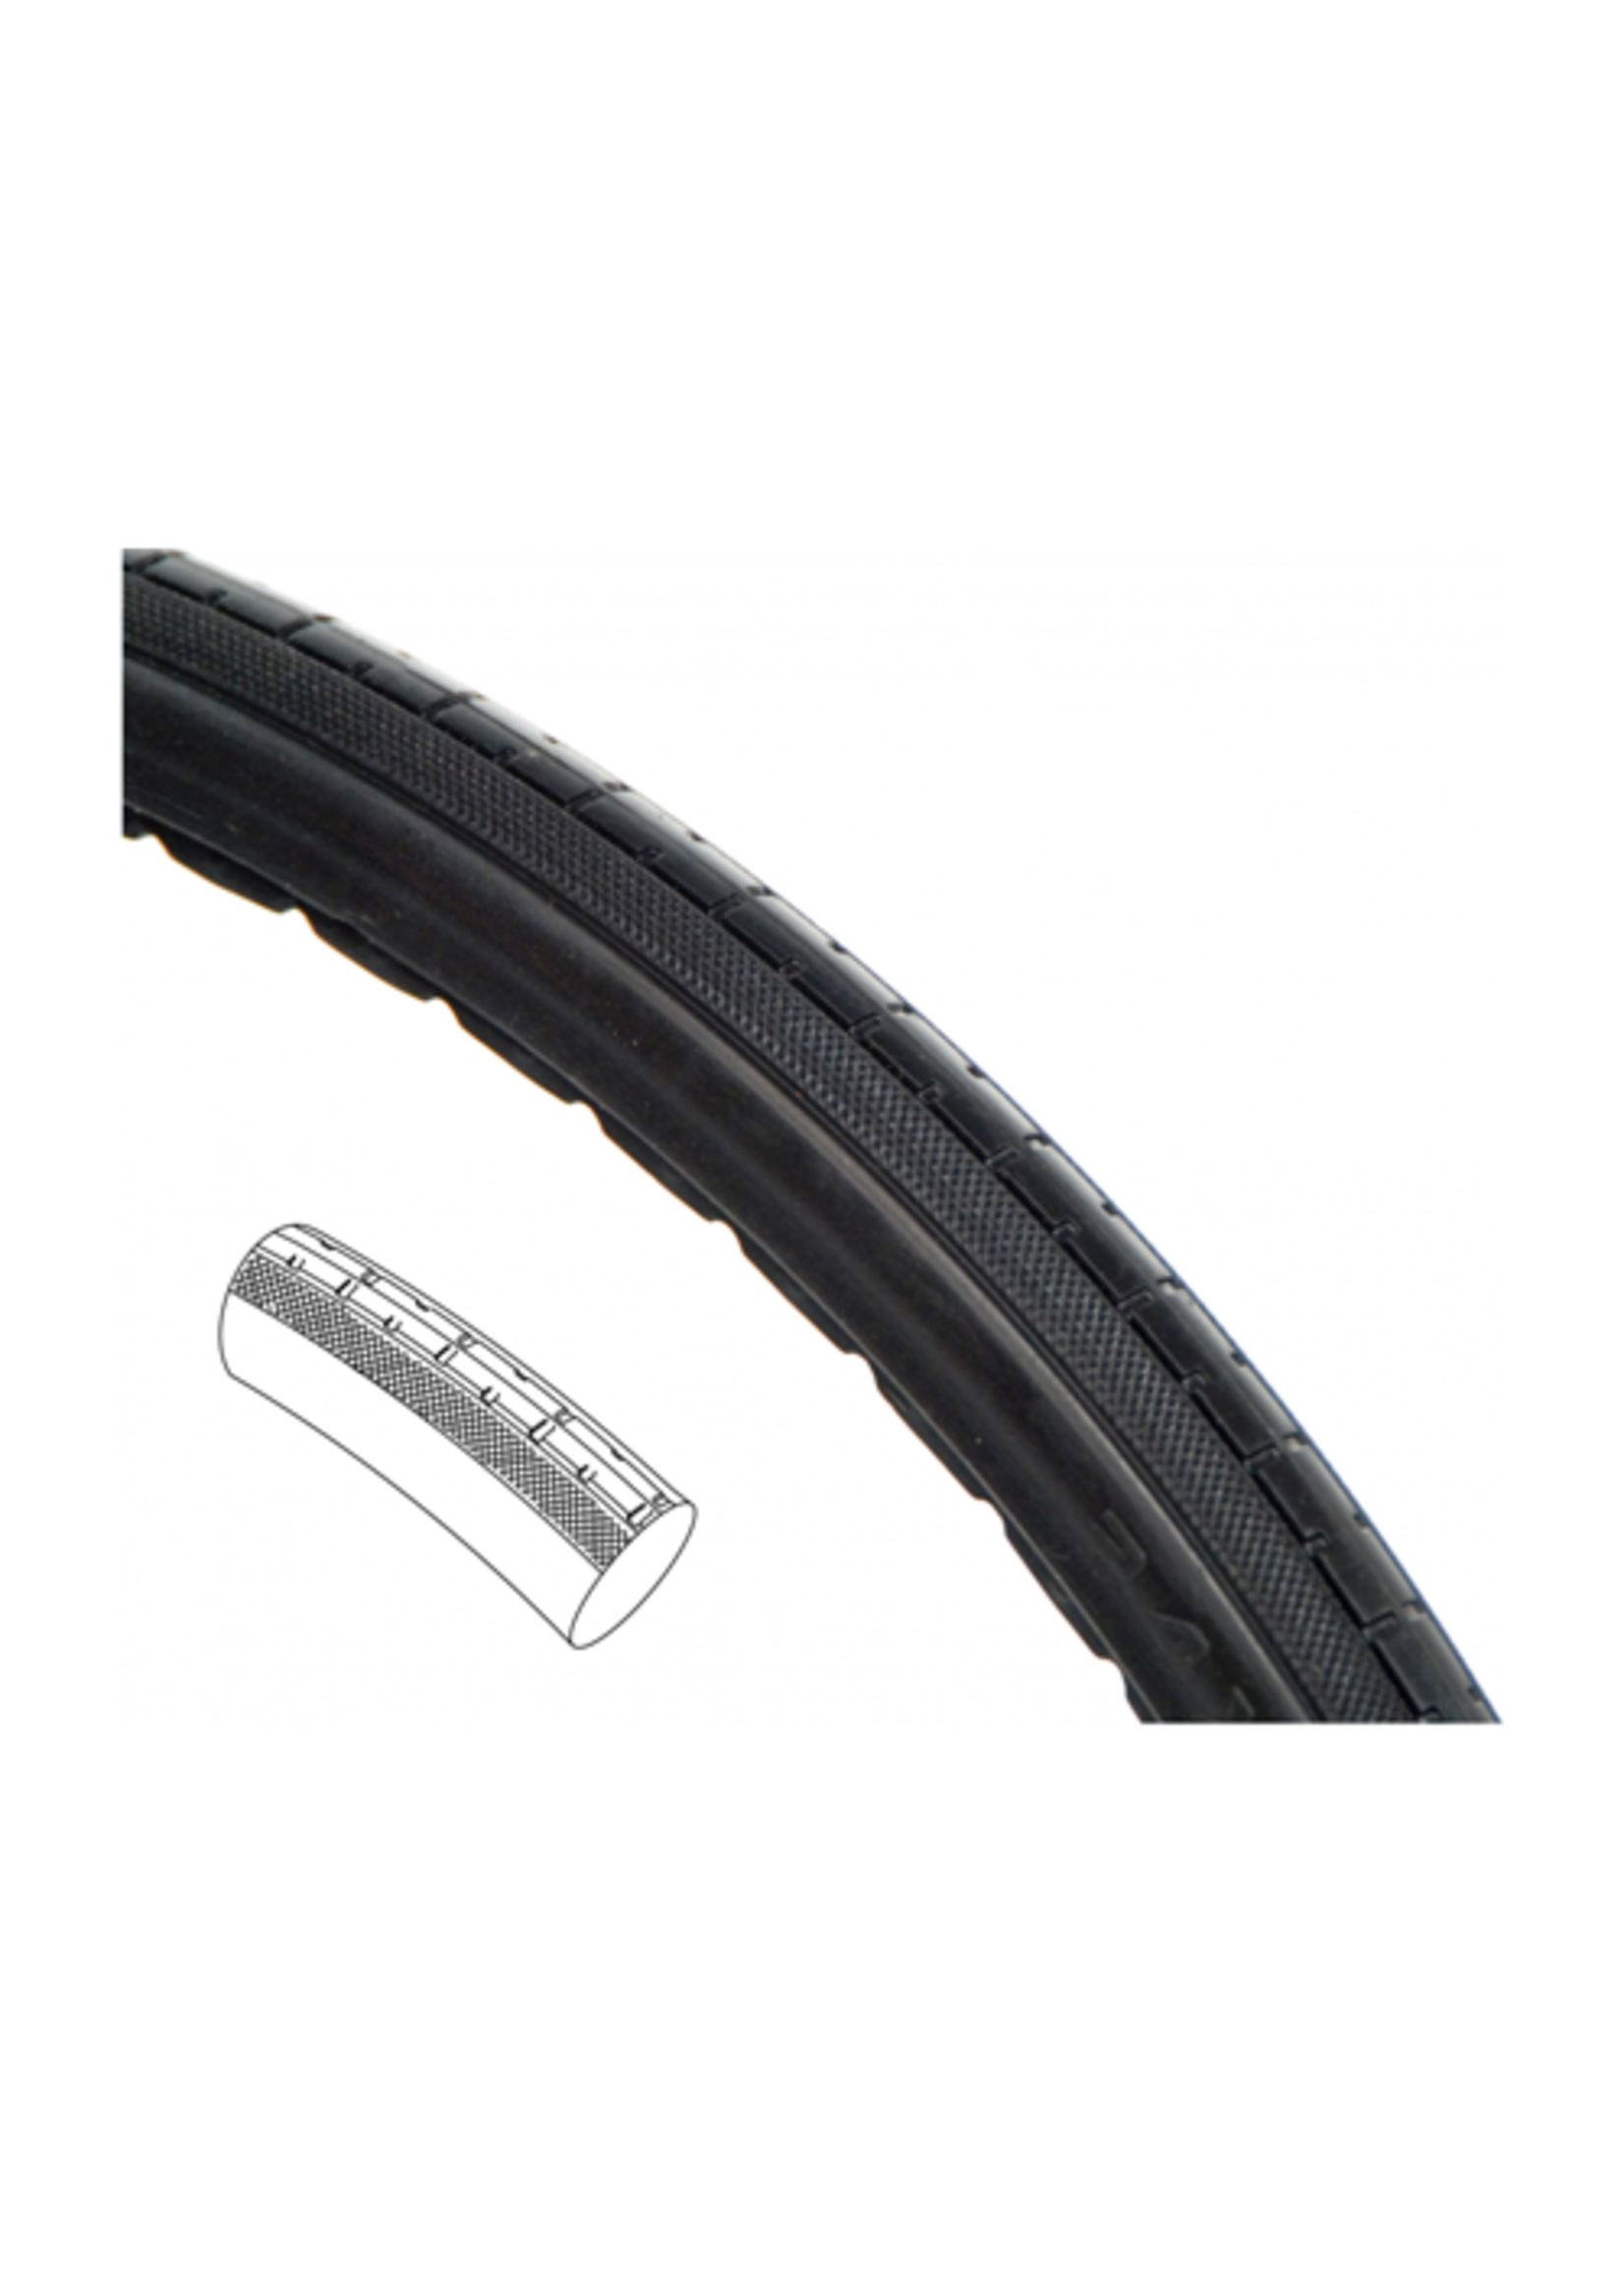 New Solutions Wheelchair Solid Tire Set 24x1 3/8